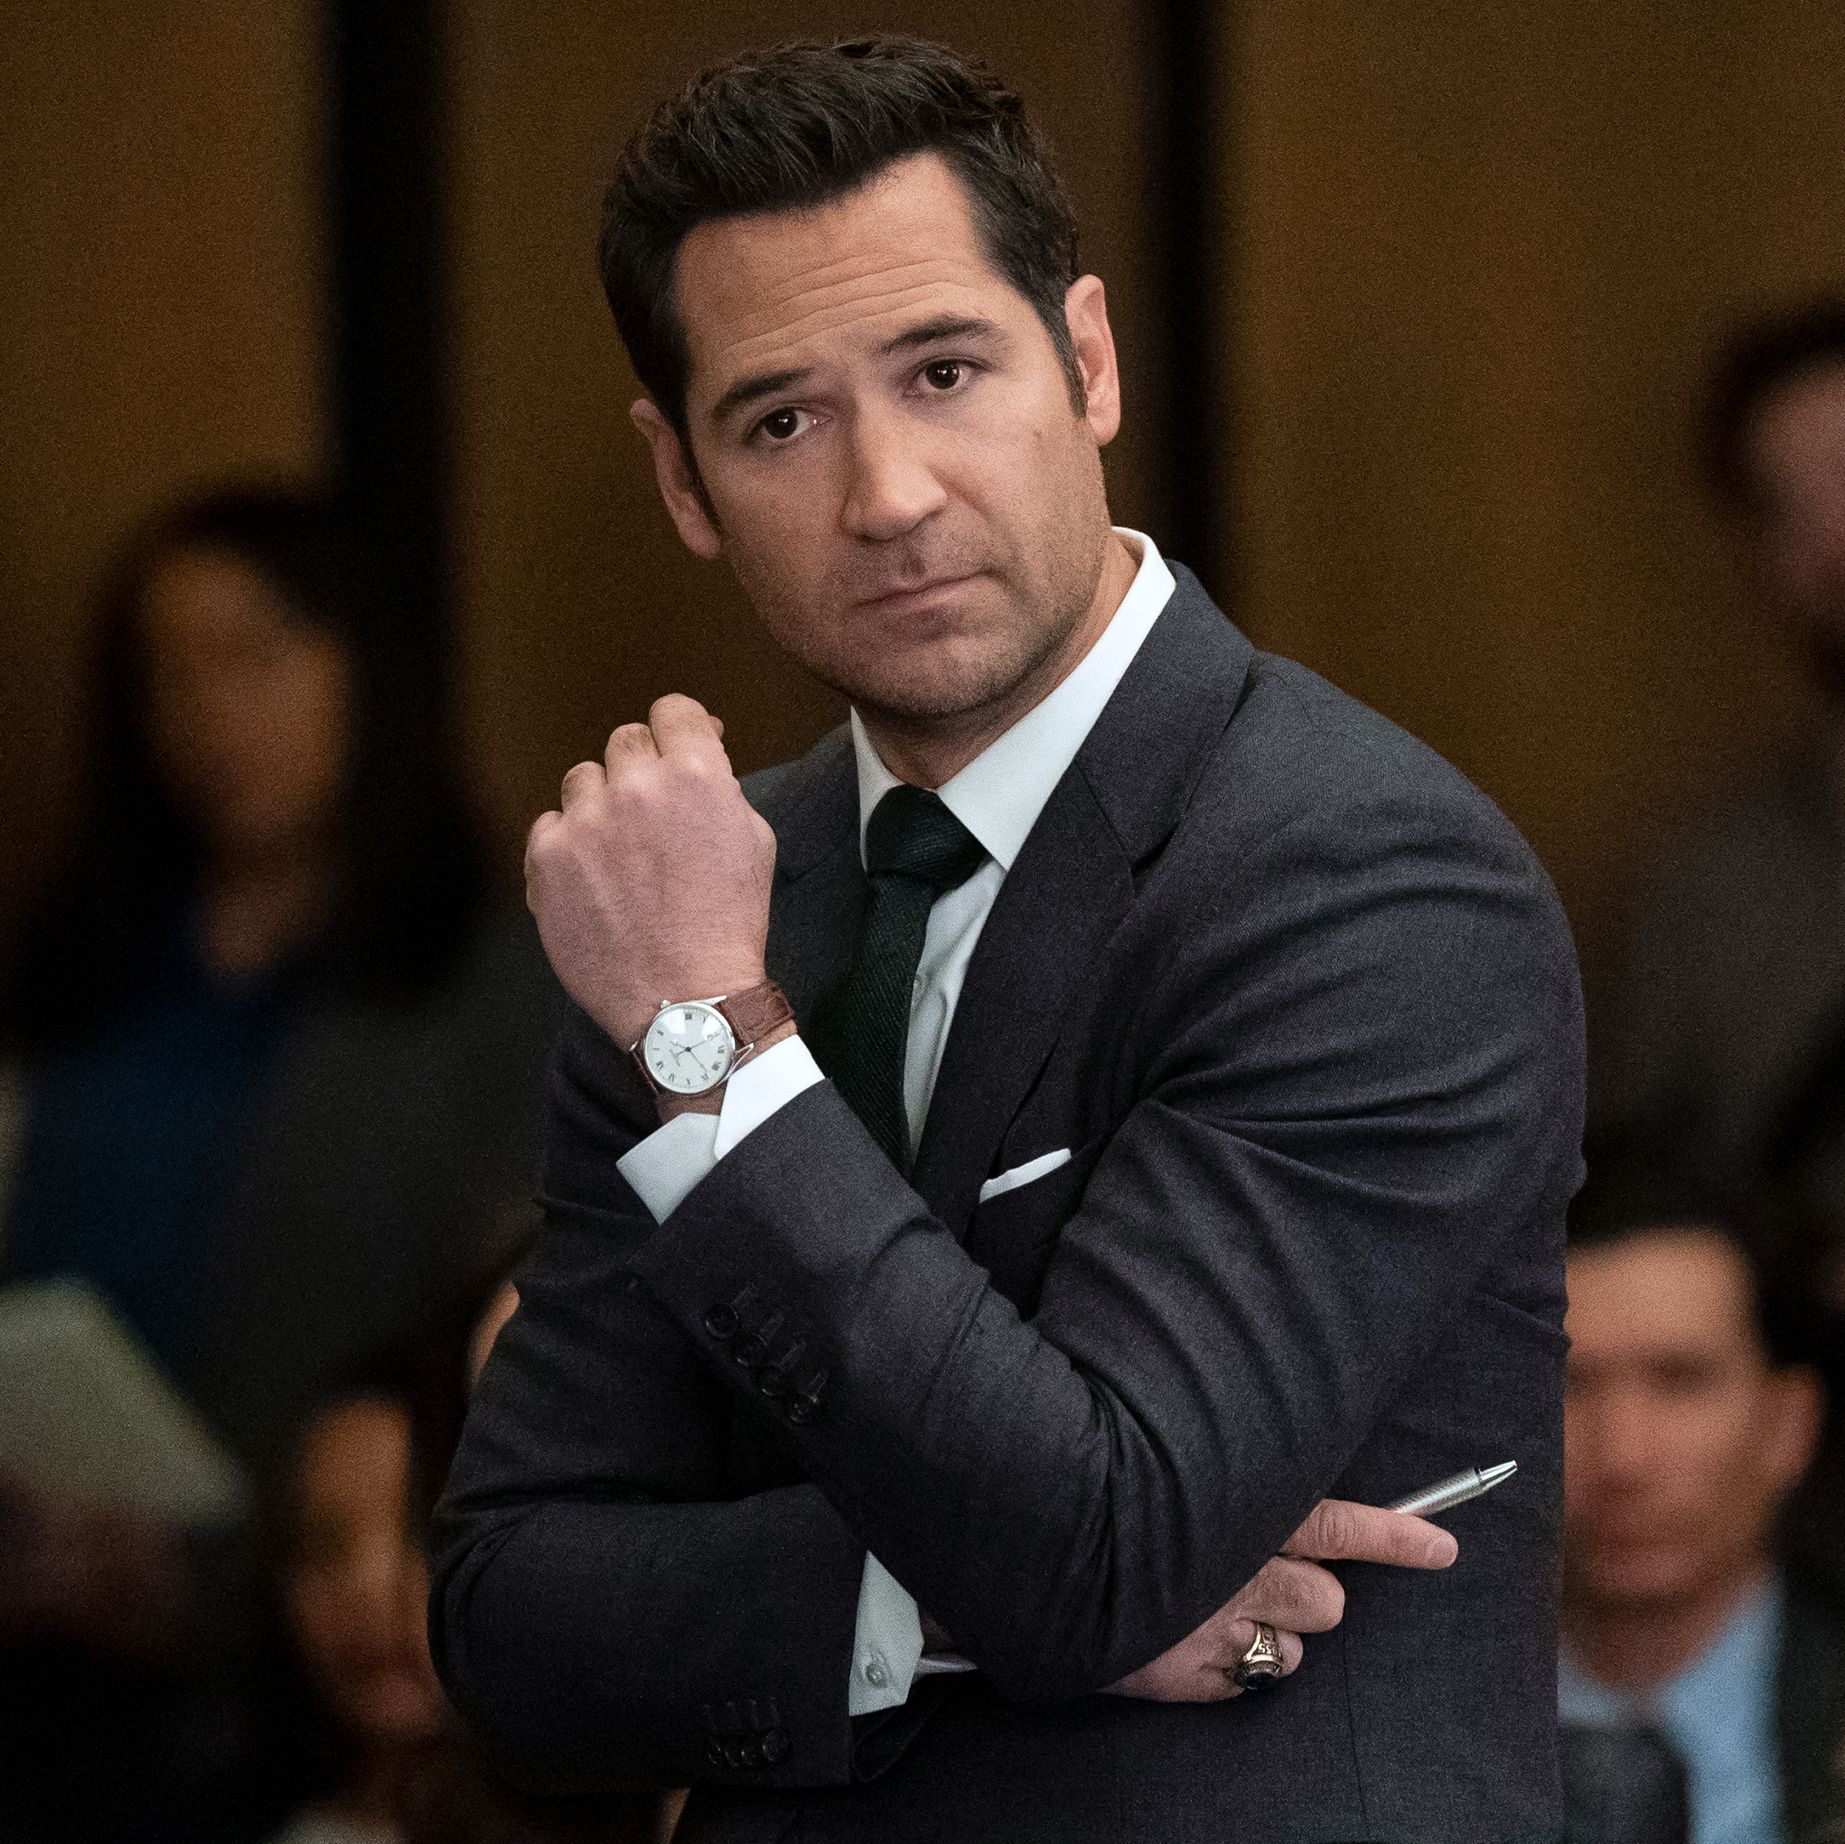 Will We See Mickey Take On Another Case in 'The Lincoln Lawyer' Season 3?